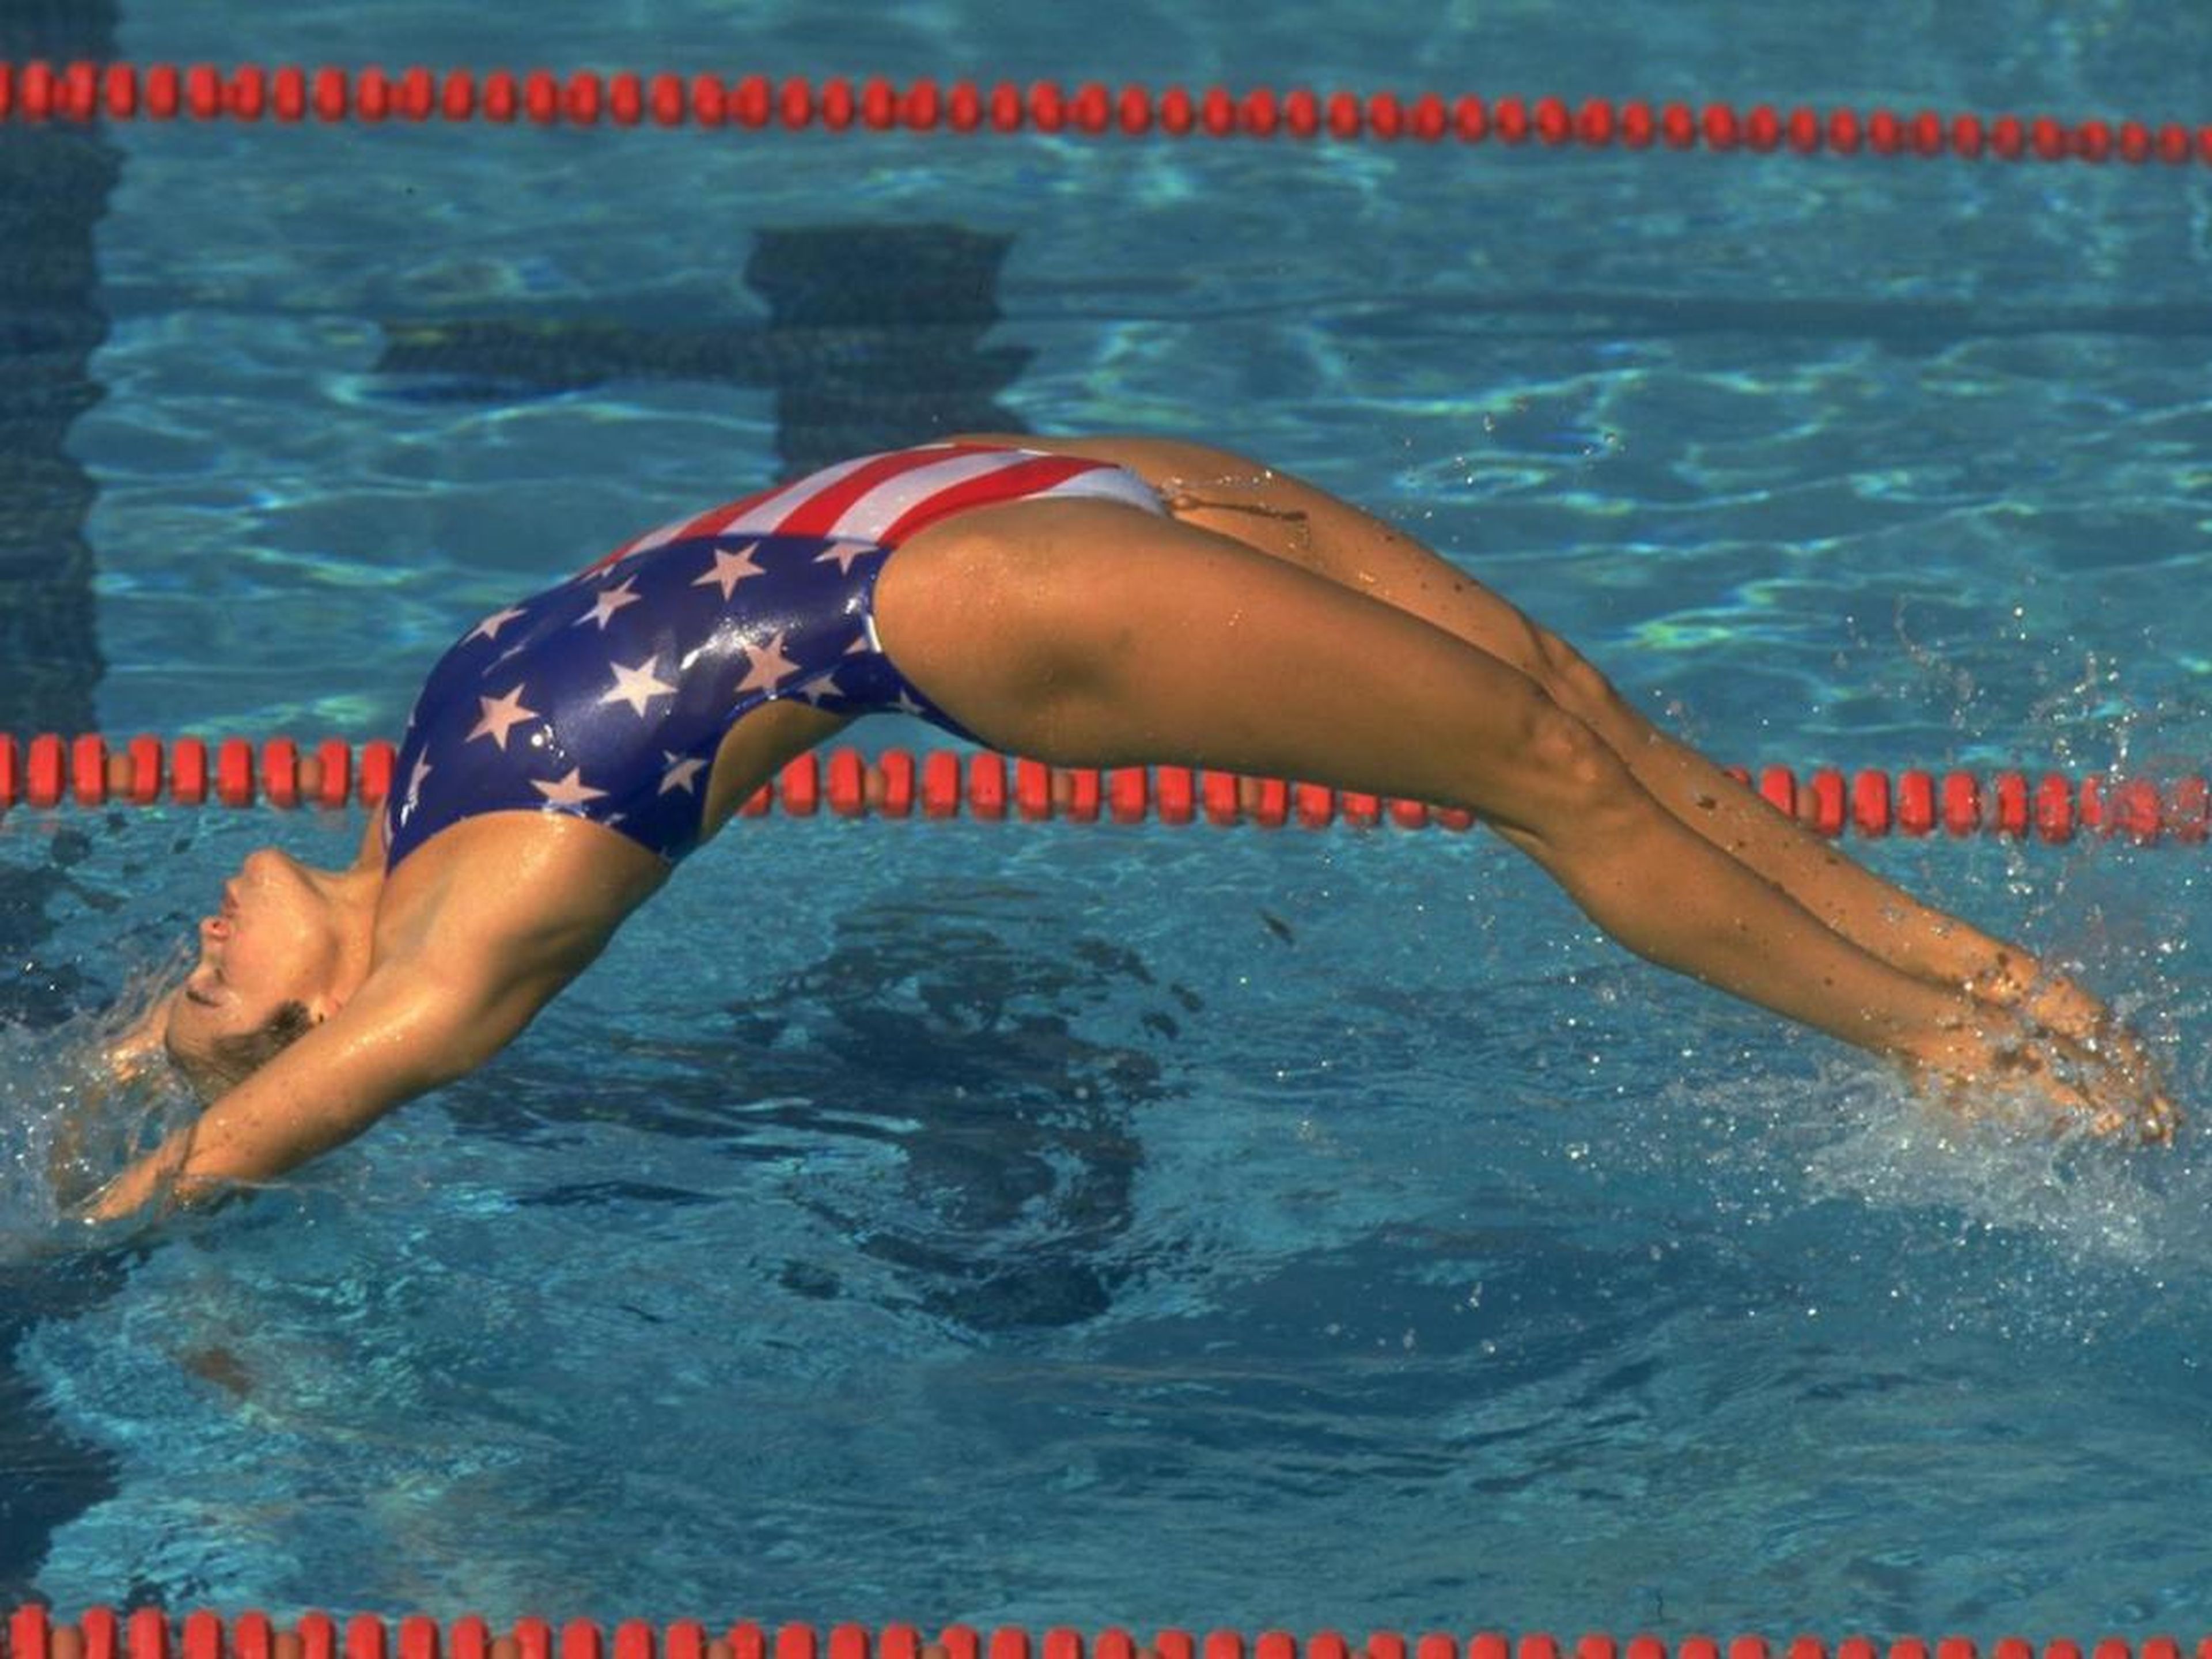 Olympian Dara Torres has won 12 swimming medals for Team USA, including four golds. Like so many of the other exercise pros we've talked to, Torres loves the core-boosting benefits of a good plank.